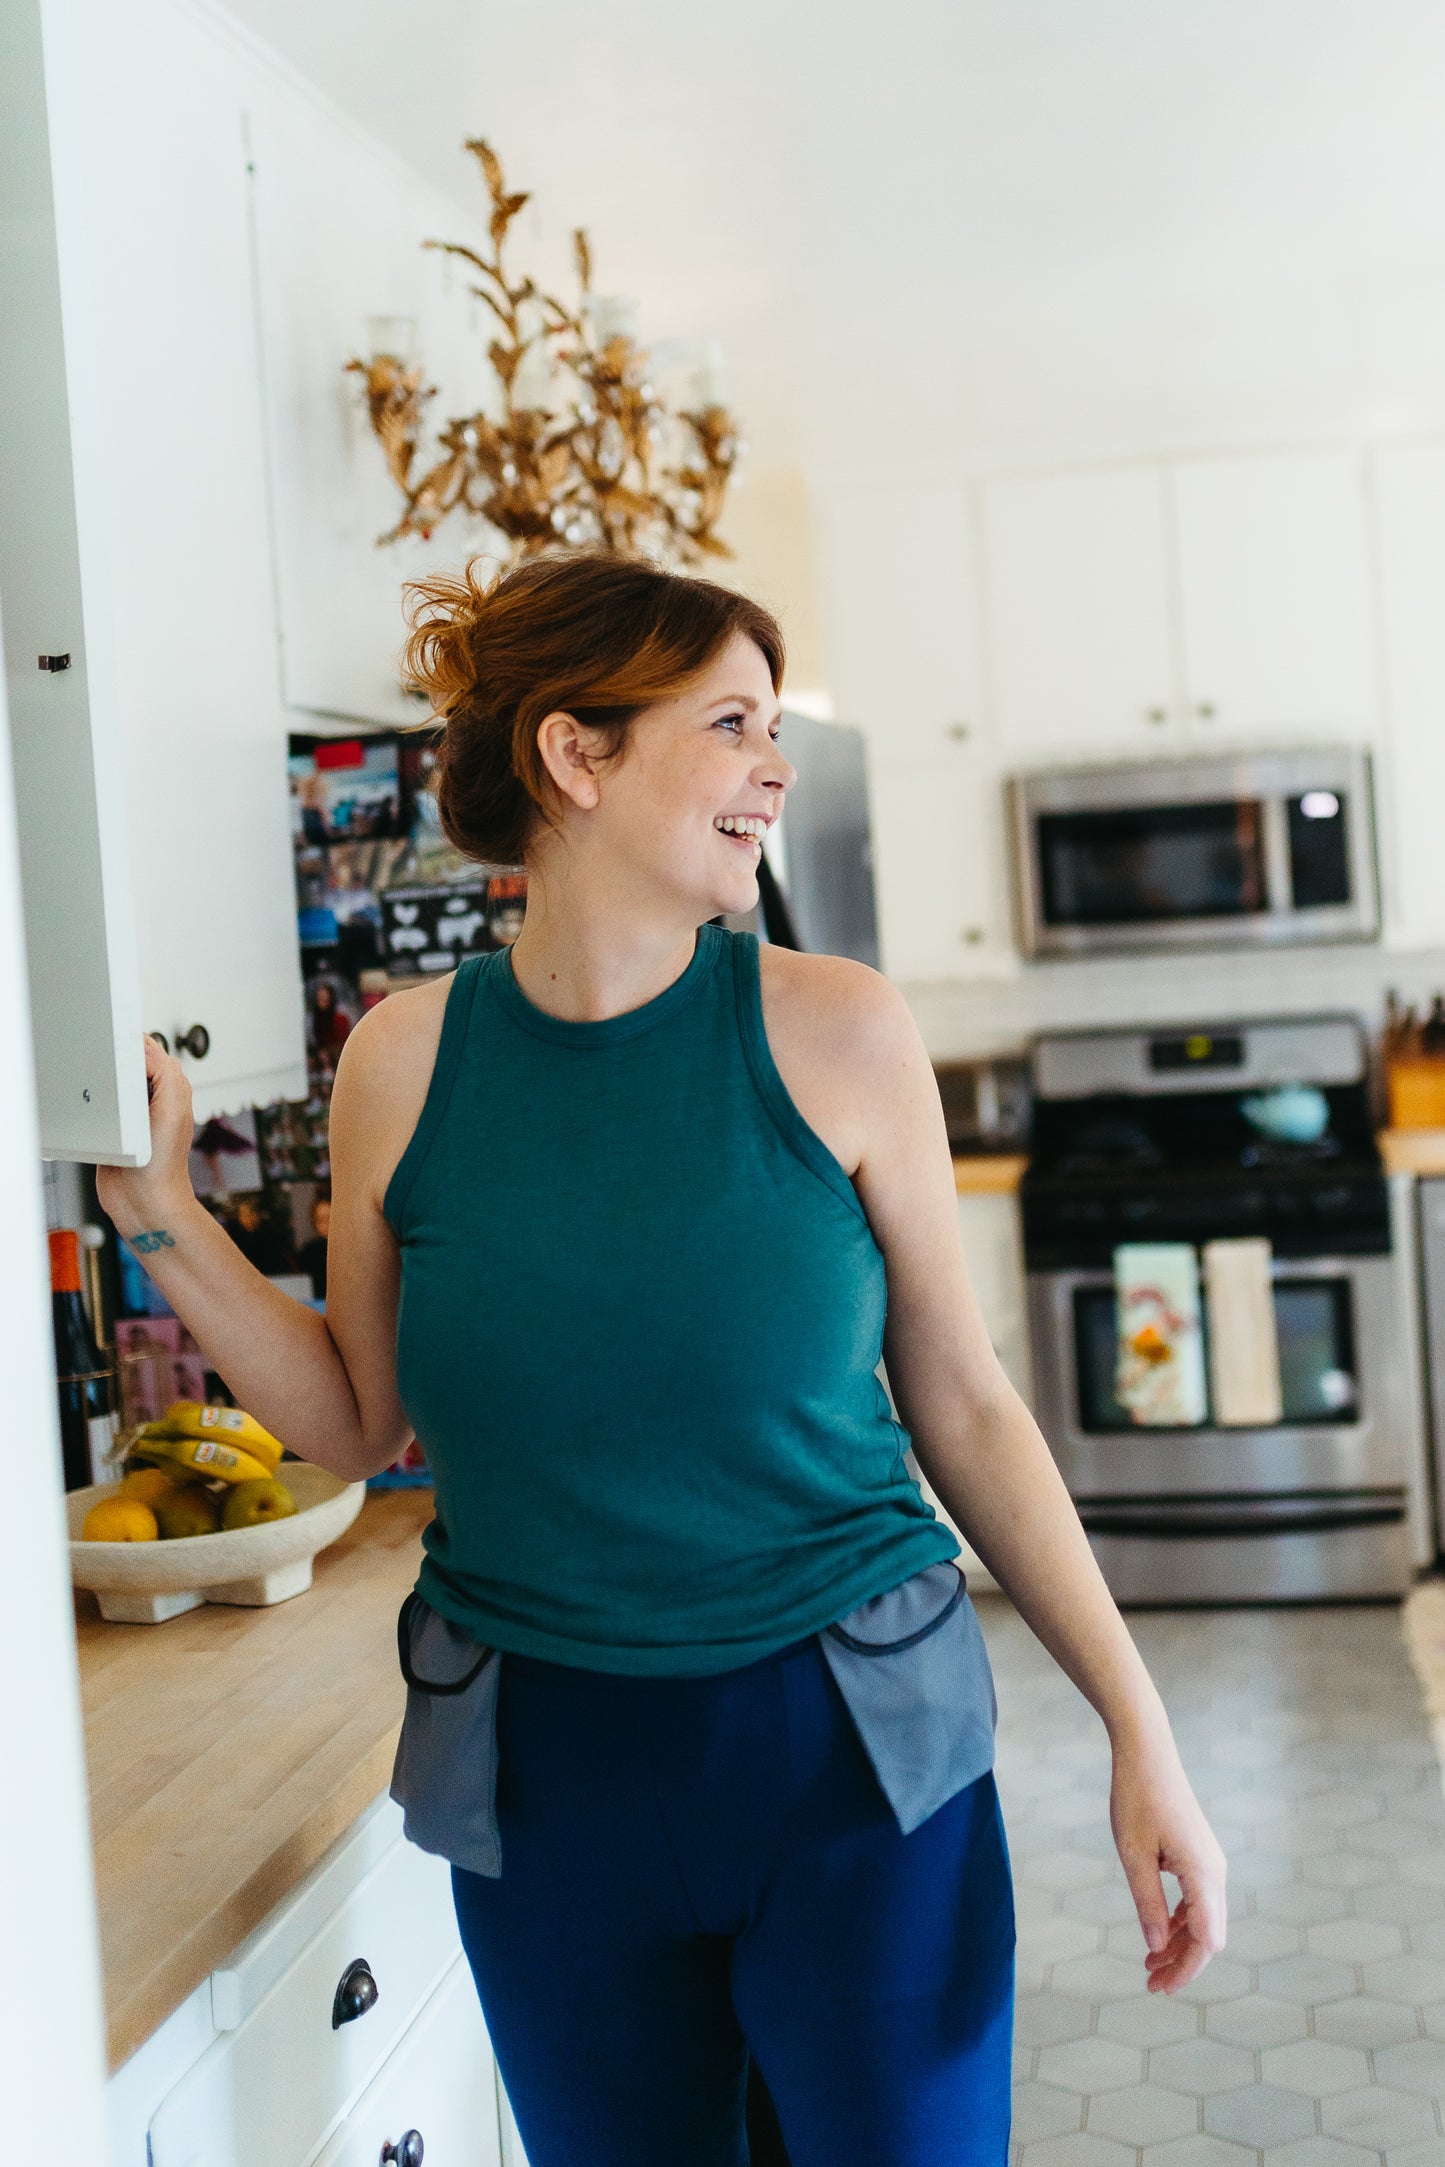 Woman wearing drain holder happily makes dinner in the kitchen